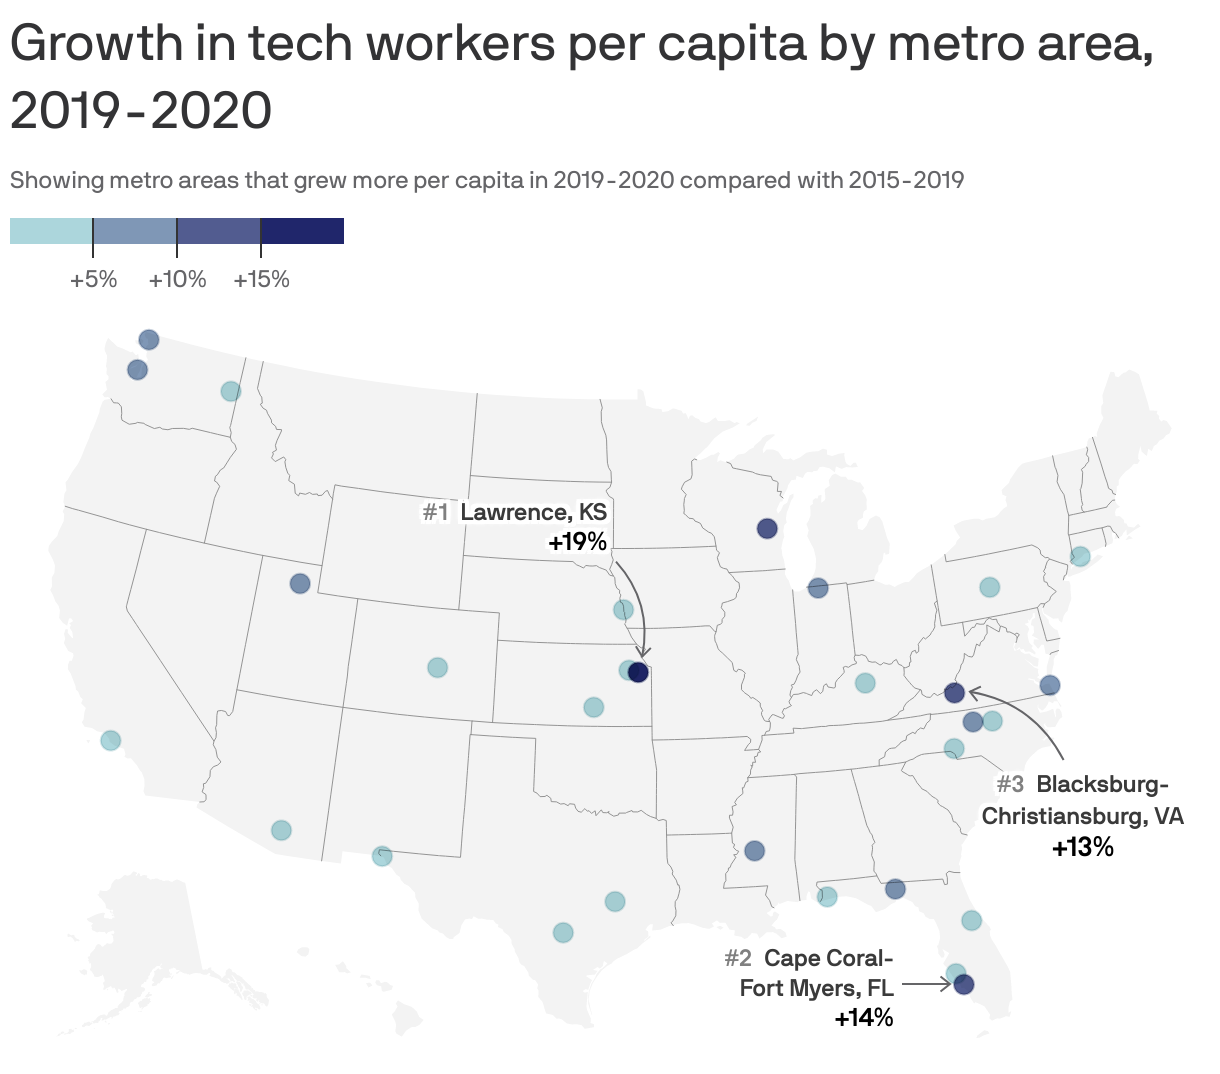 Growth in tech workers per capita by metro area, 2019-2020